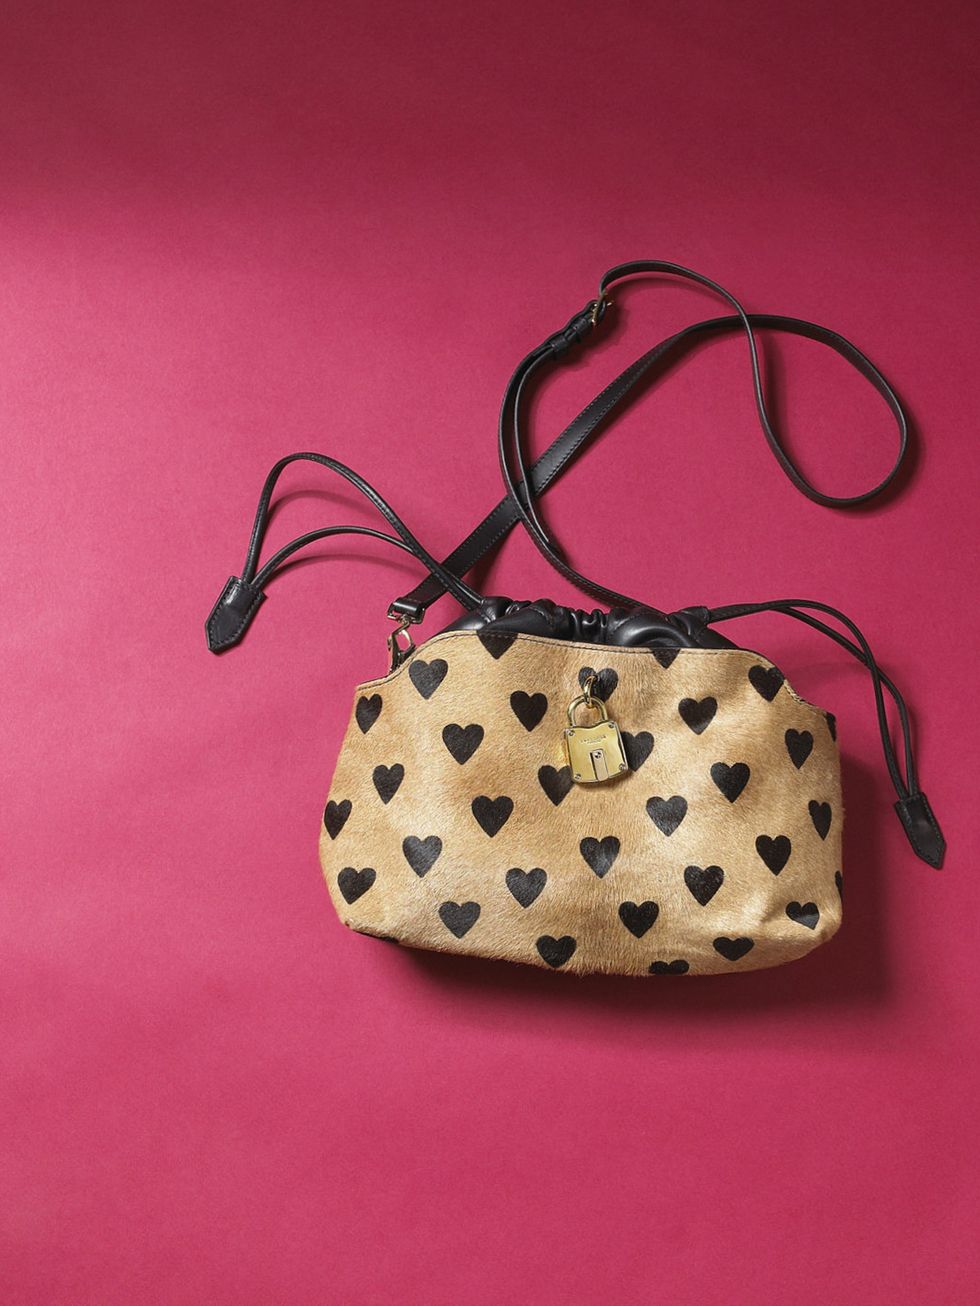 <p>We fell in love with the Little Crush bag from Burberry, £875, that it seems to be on everyones list this season but Leisa Barnett is calling dibs.</p><p><a href="http://www.elleuk.com/promotion_old/cointreau3/simone-rocha-christmas-gift-guide">See 